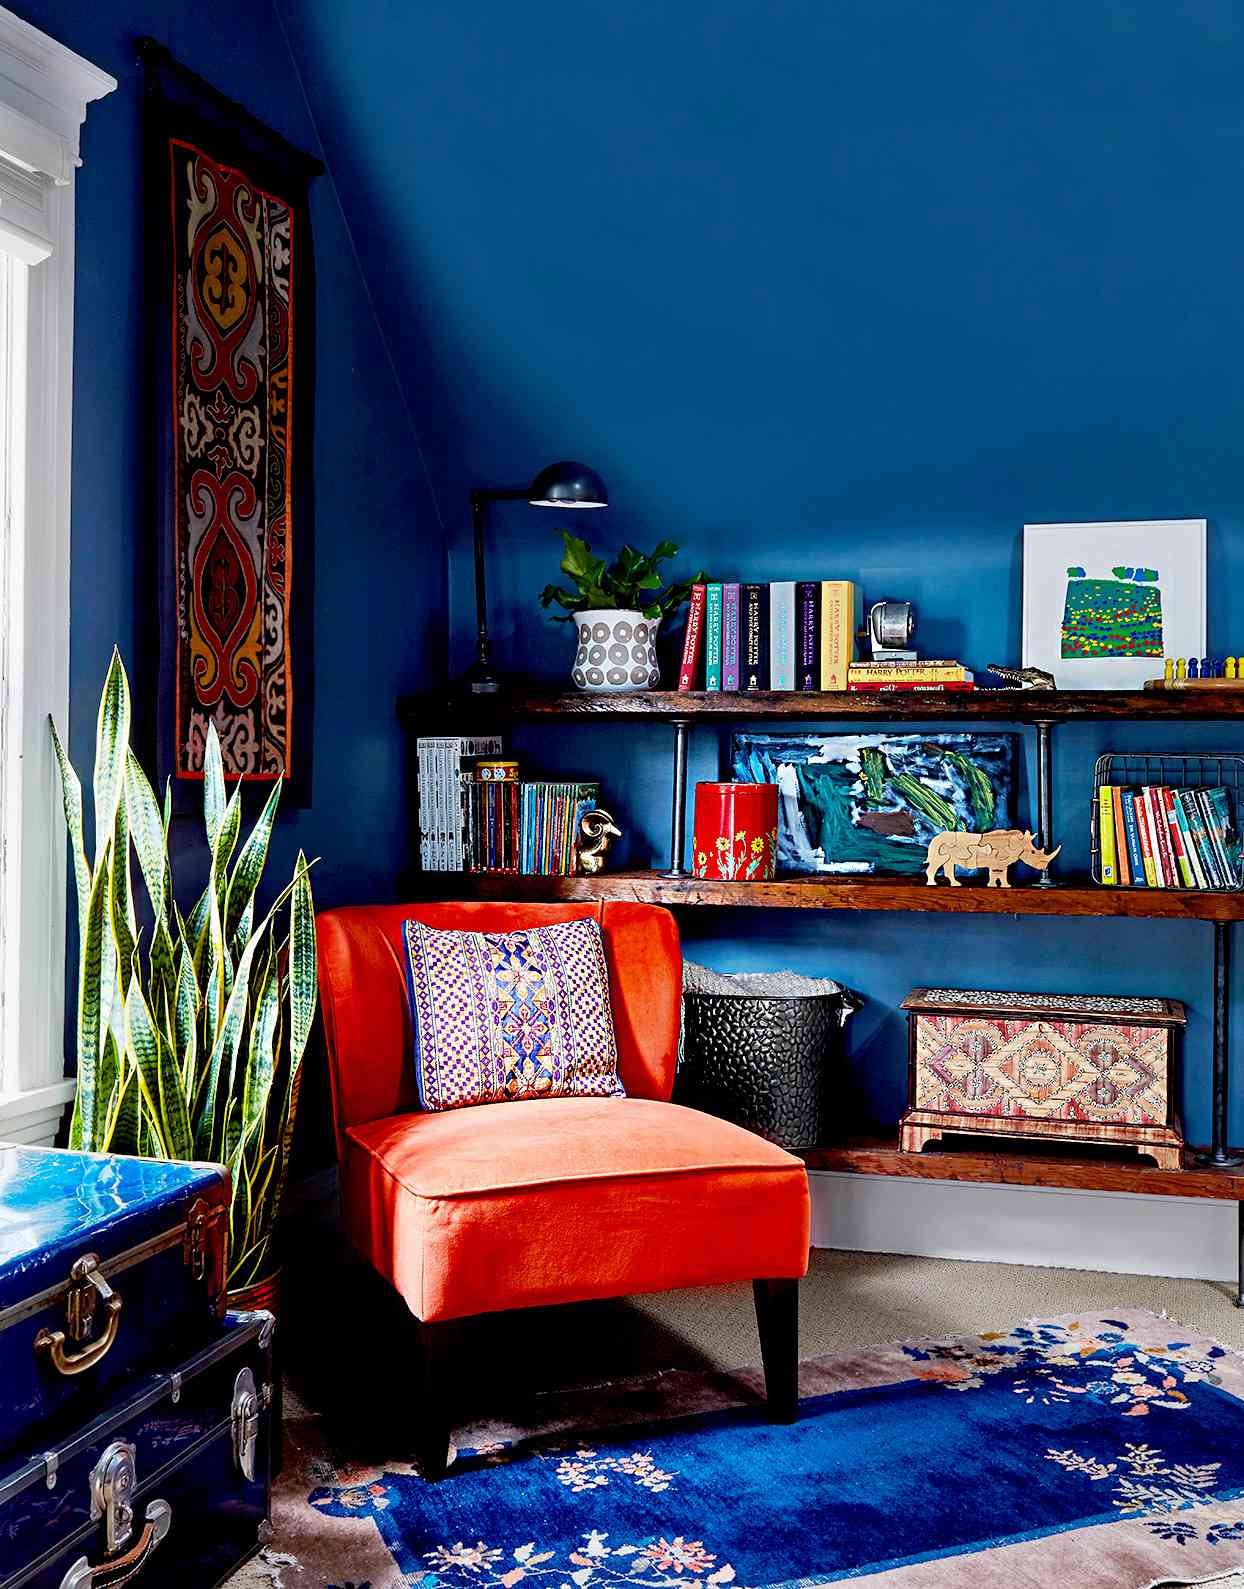 Dark blue walls with orange chair and shelving